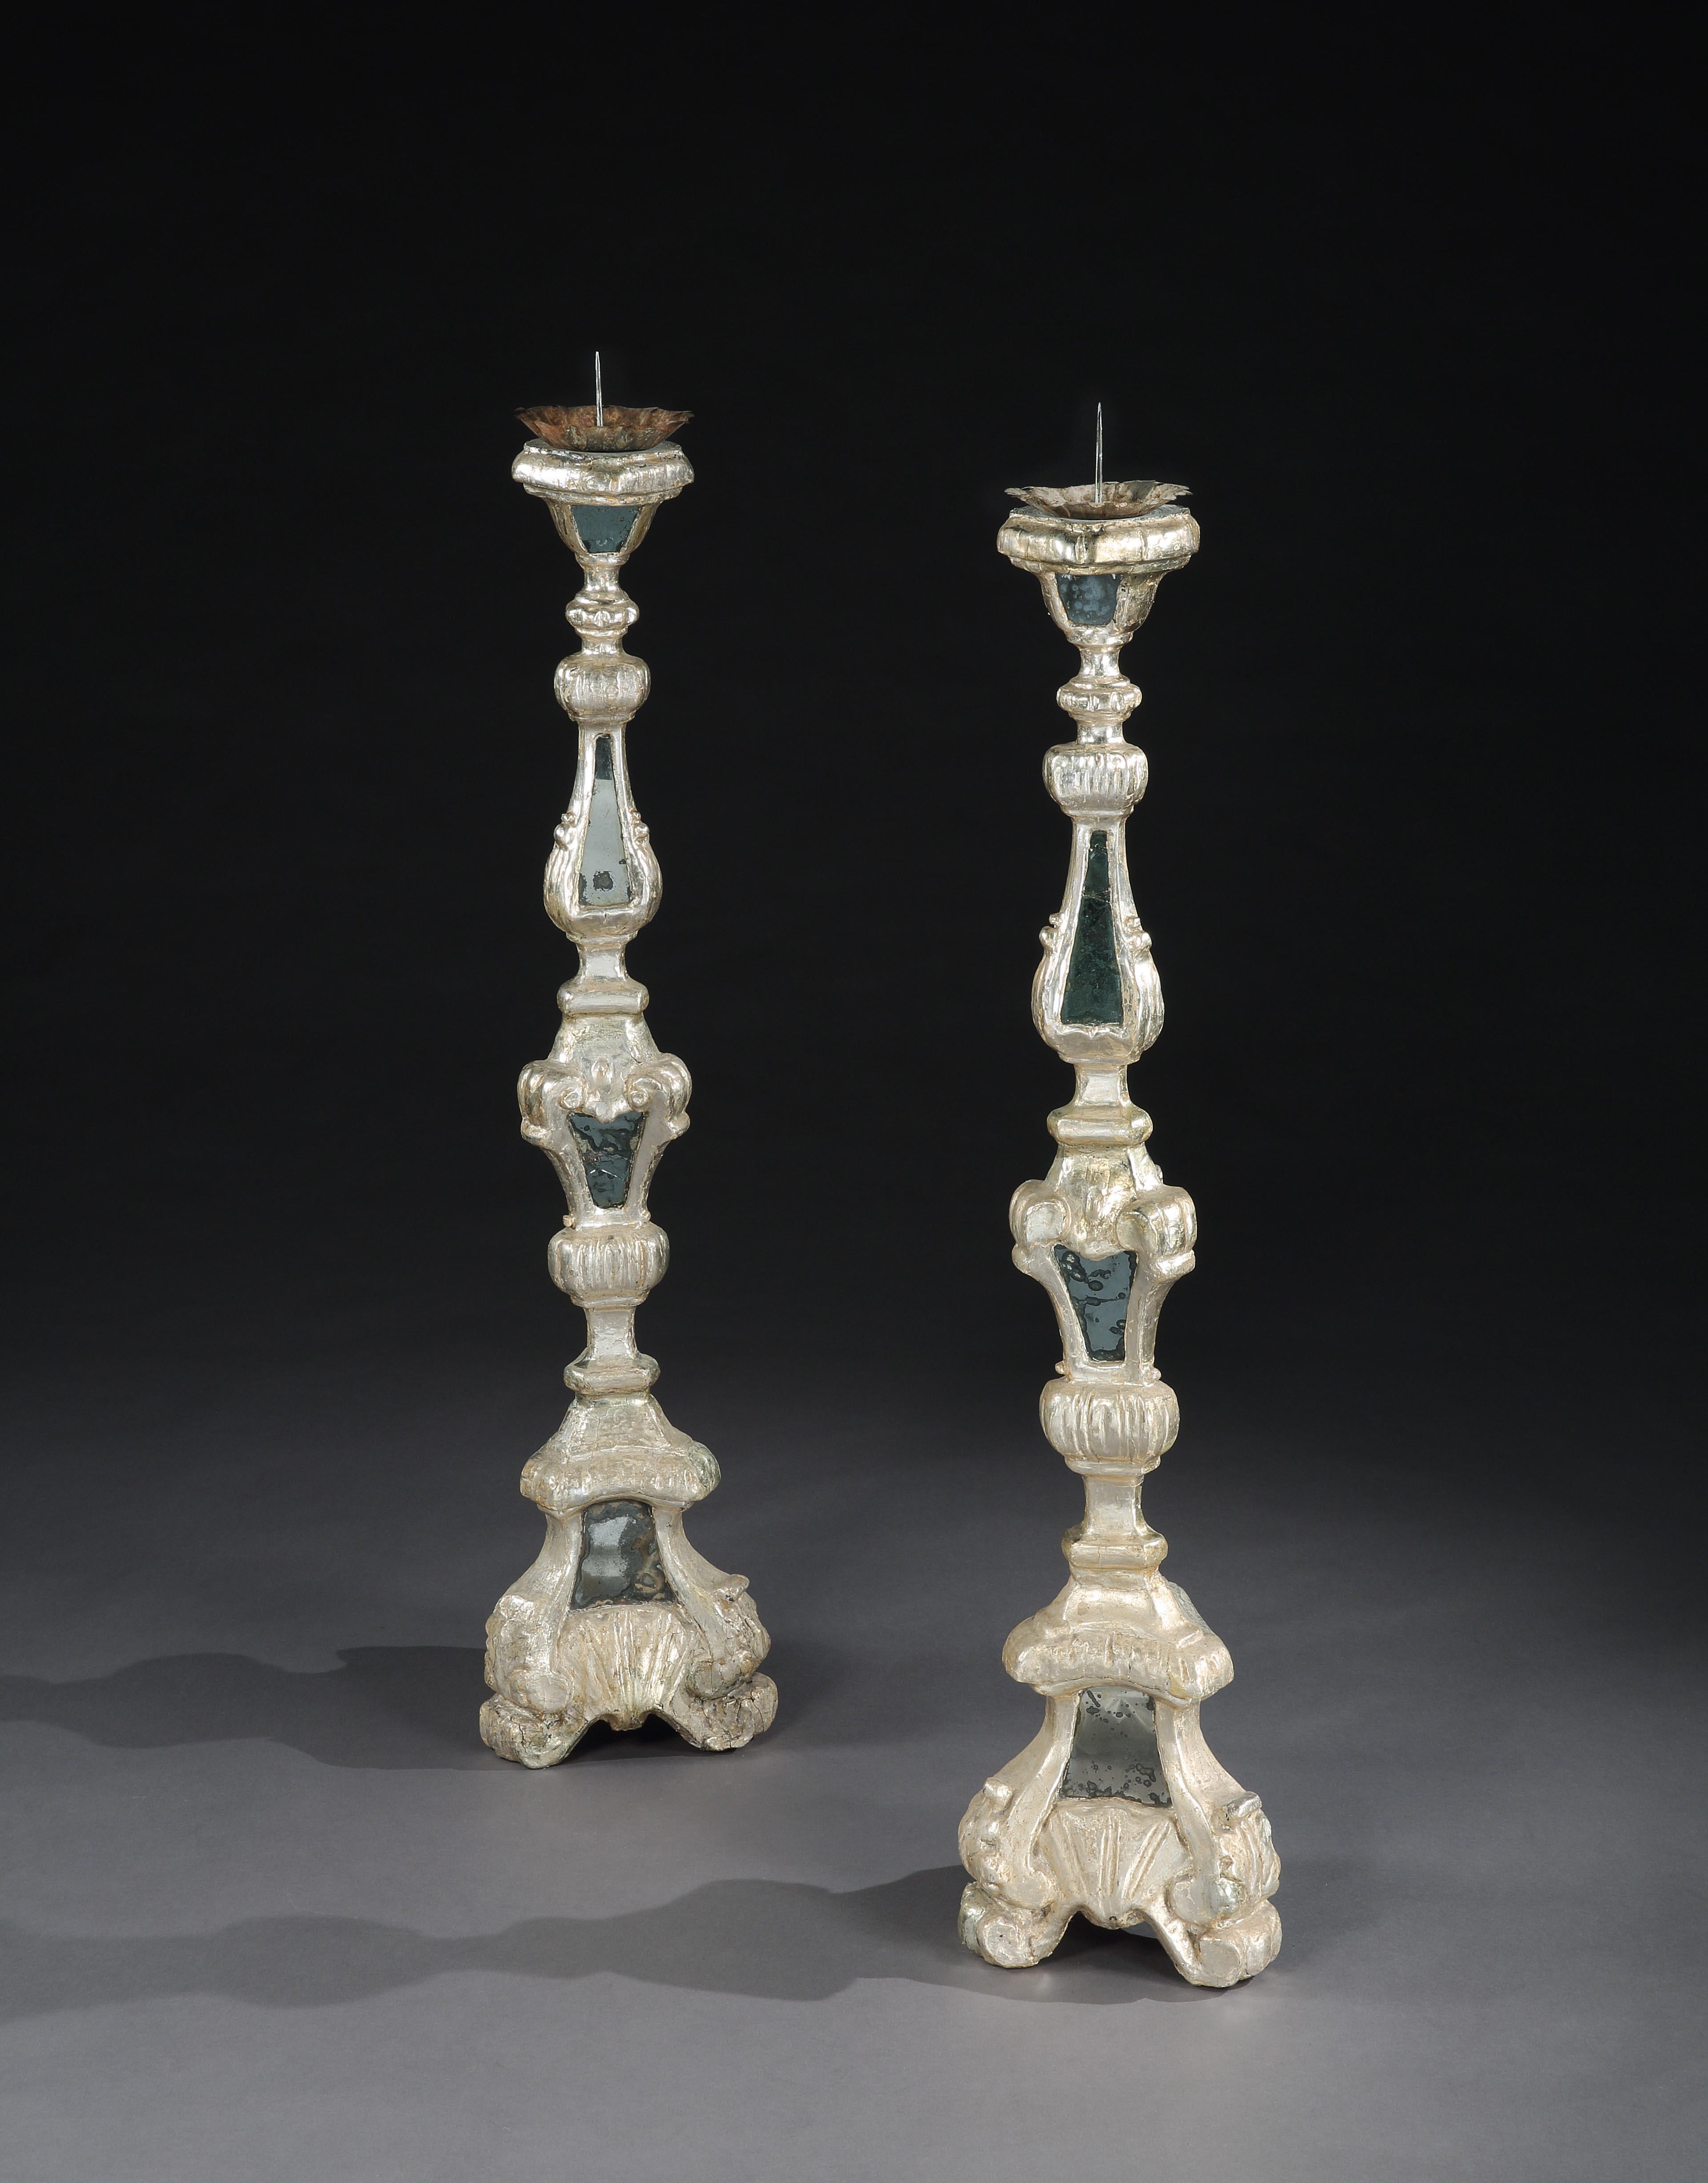 Exceptionally rare, pair of 18th century, period, silver-gilt, 1.57m, 5ft 2in